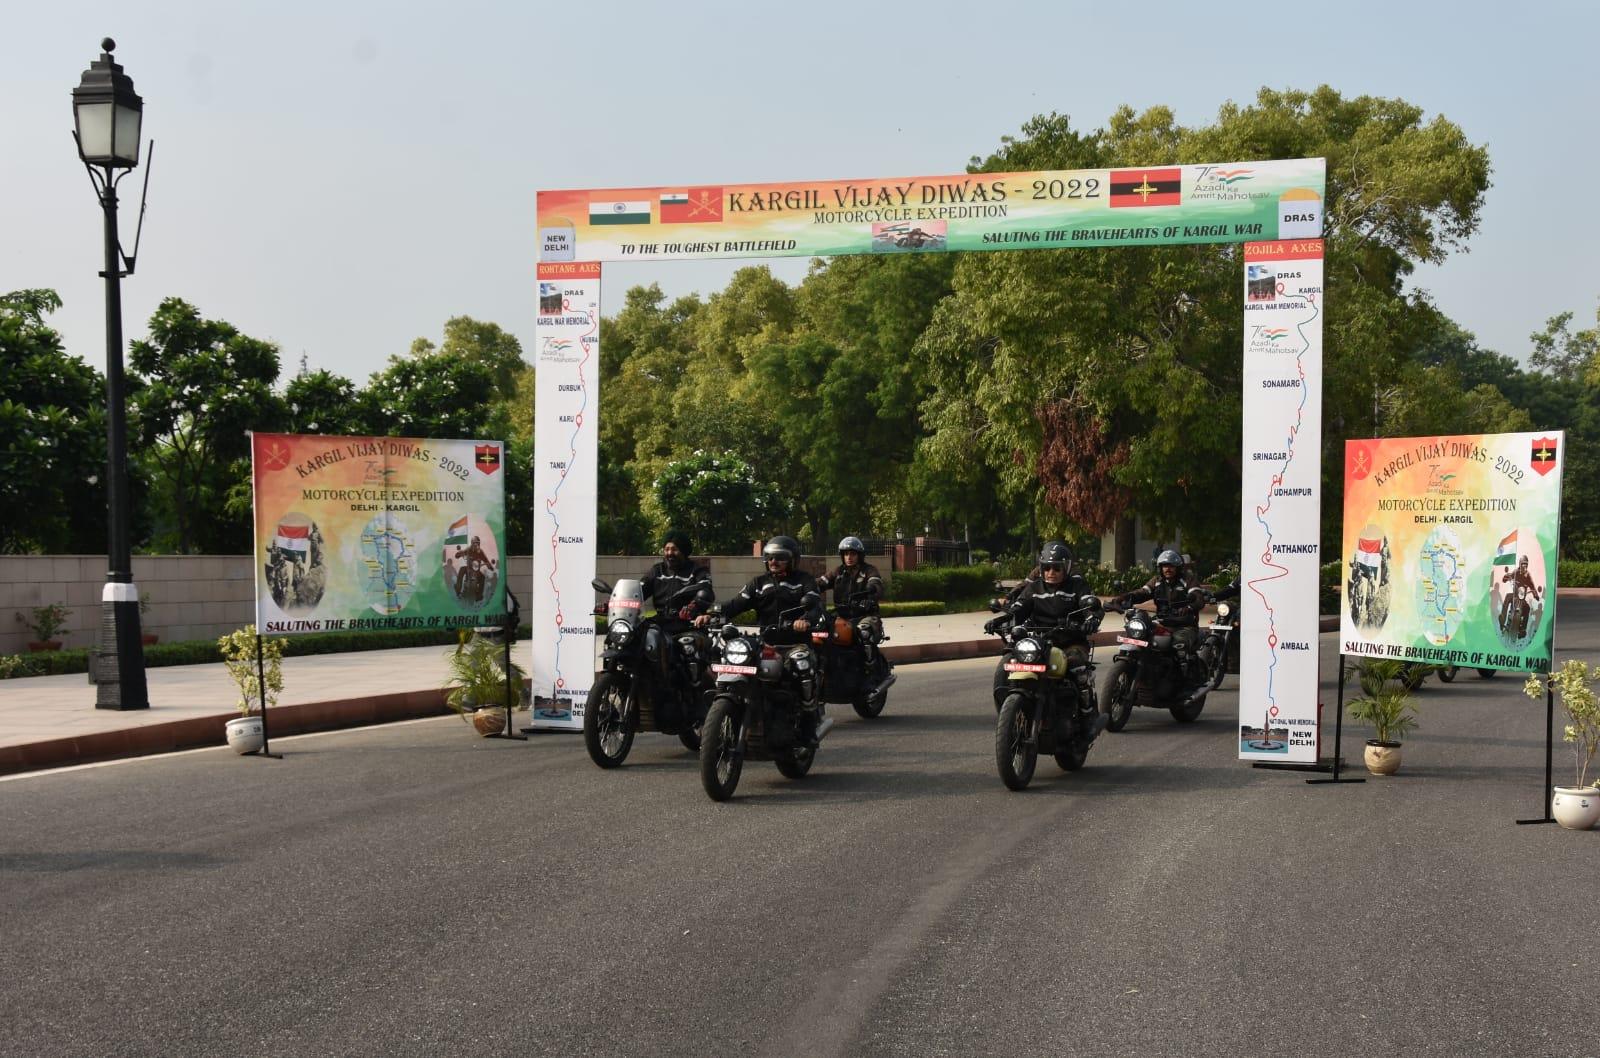 To commemorate victory in the Kargil War, motorcycle expedition ...